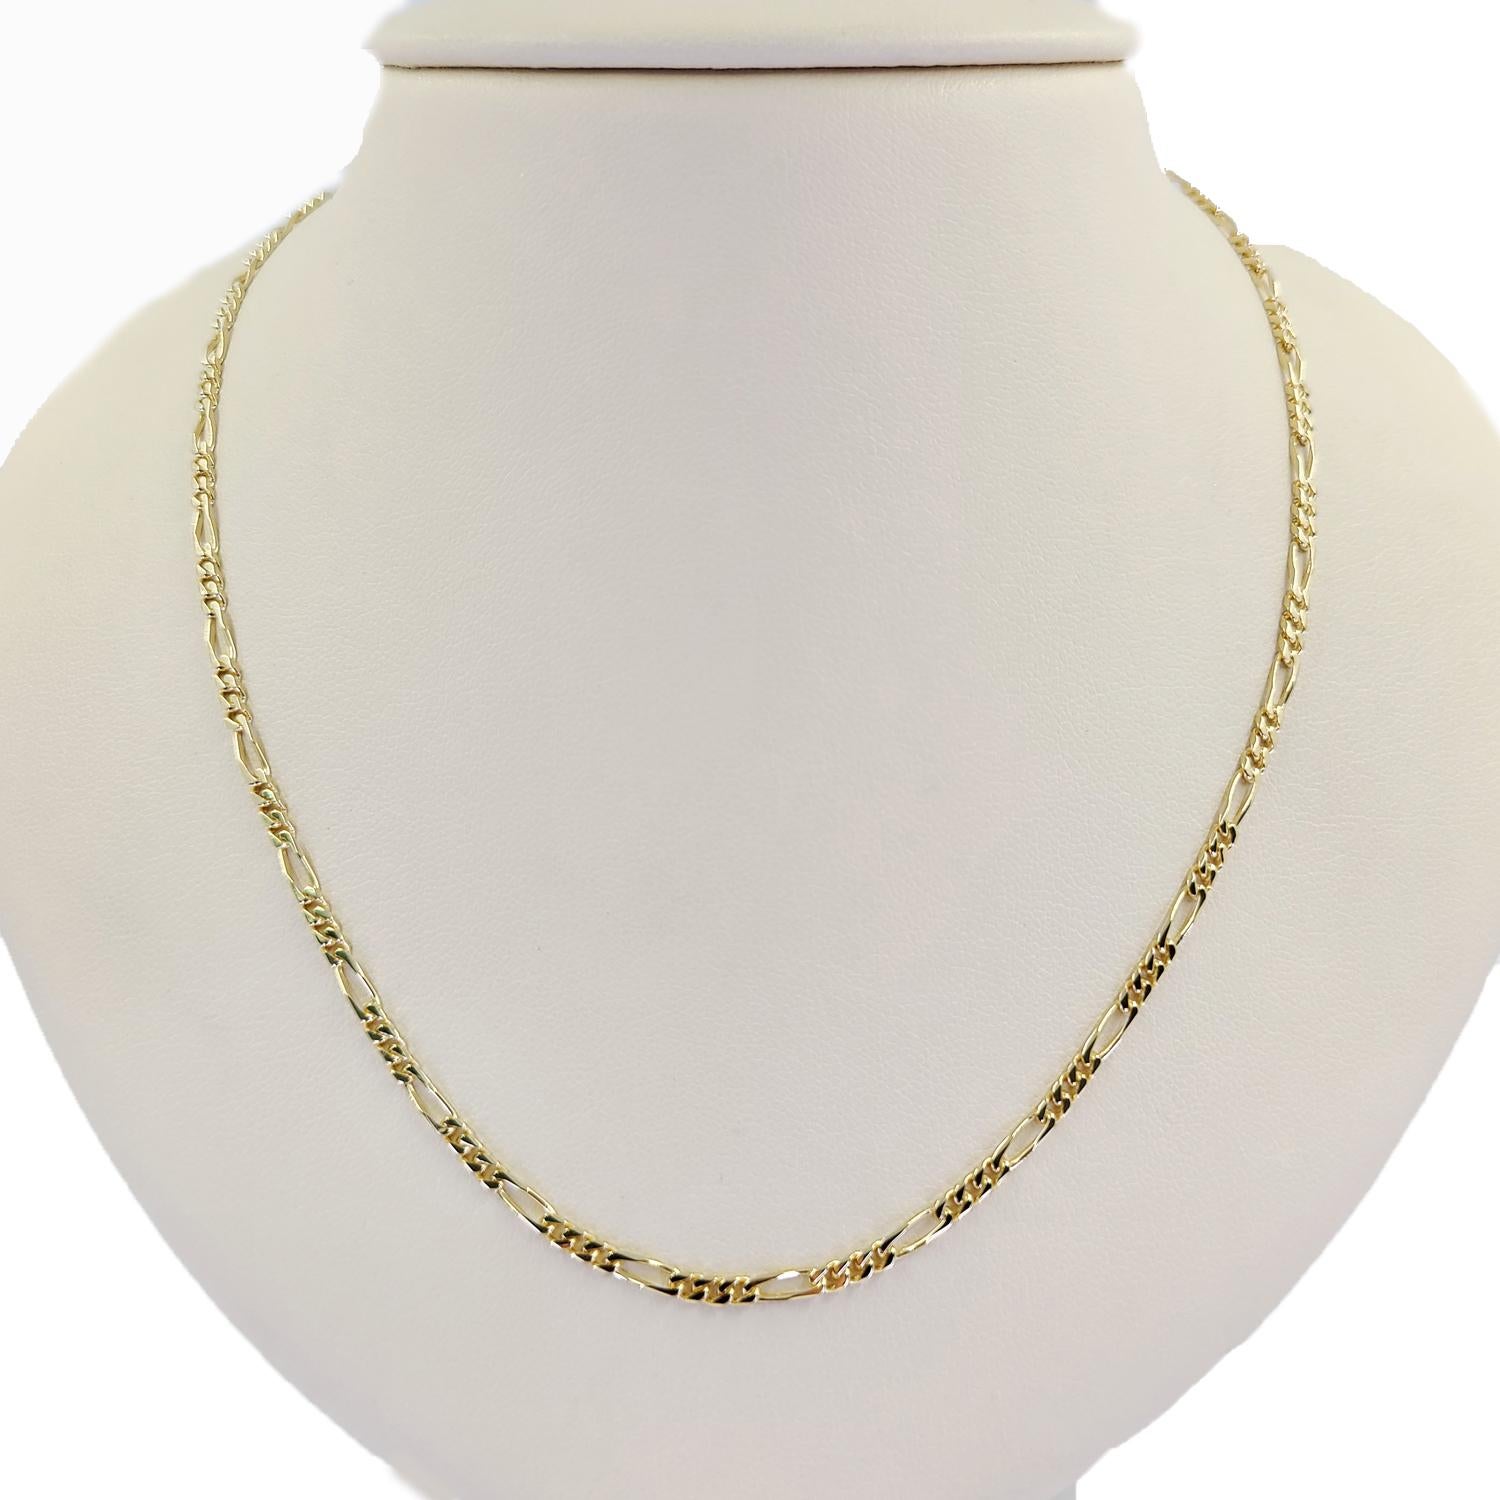 14 Karat Yellow Gold 2.5mm Wide Figaro Chain Measuring 30 Inches Long with Lobster Clasp. Finished Weight Is 11.5 Grams.